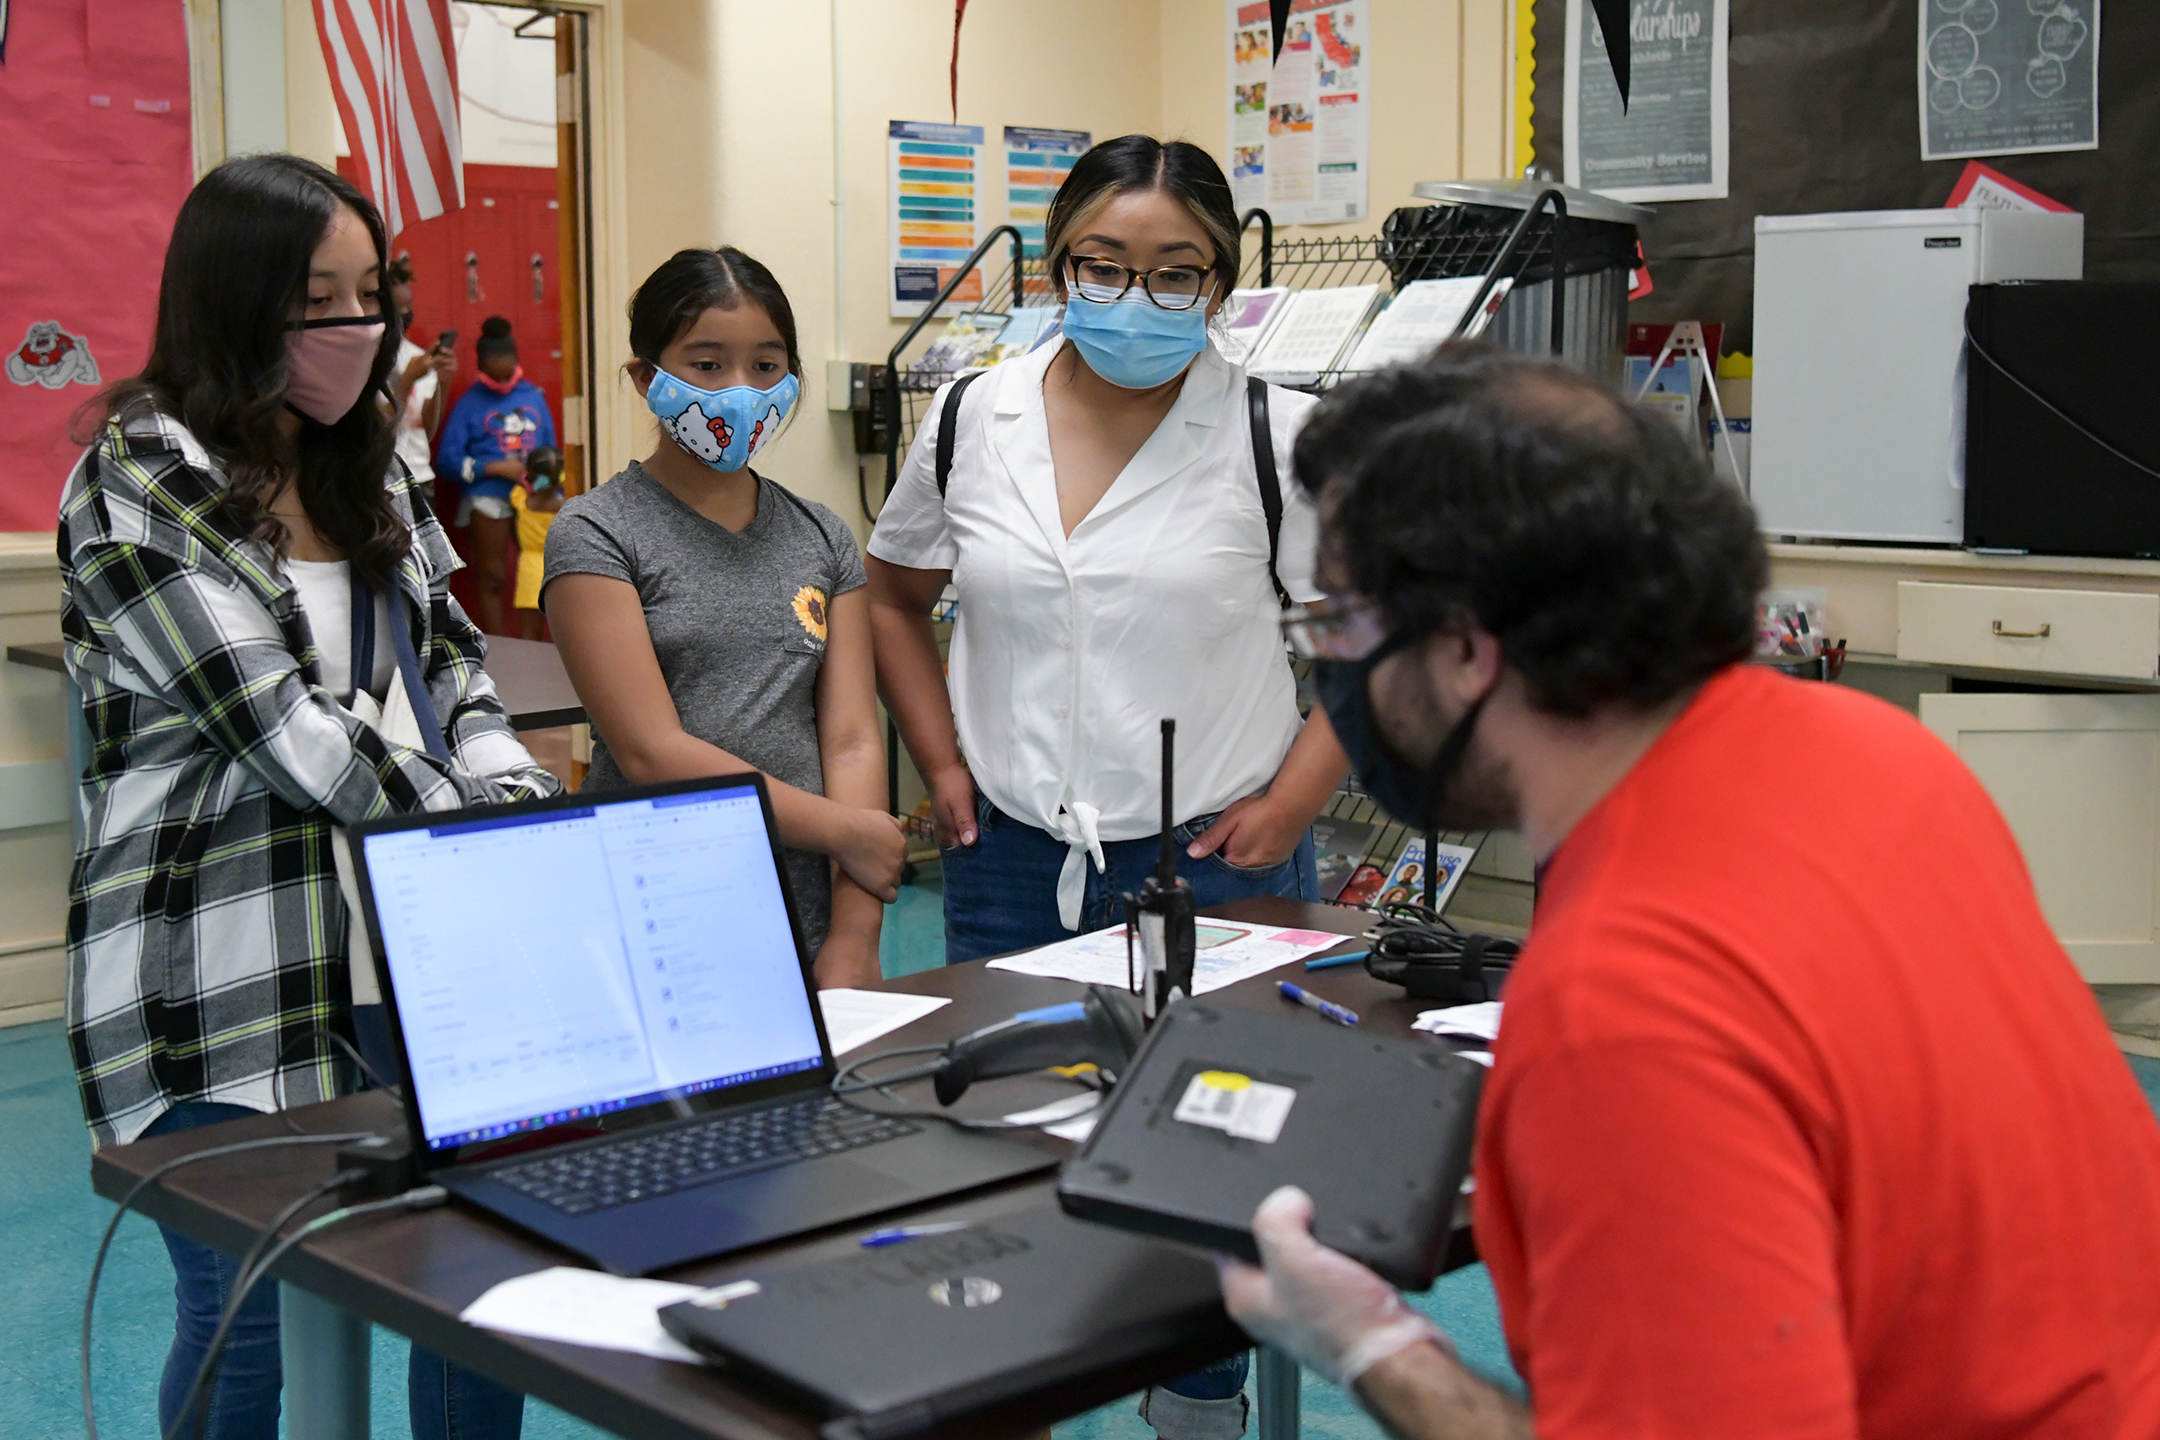 A mother and her two children, all wearing face masks, stand in front of a school administrator who is preparing to loan them a laptop computer